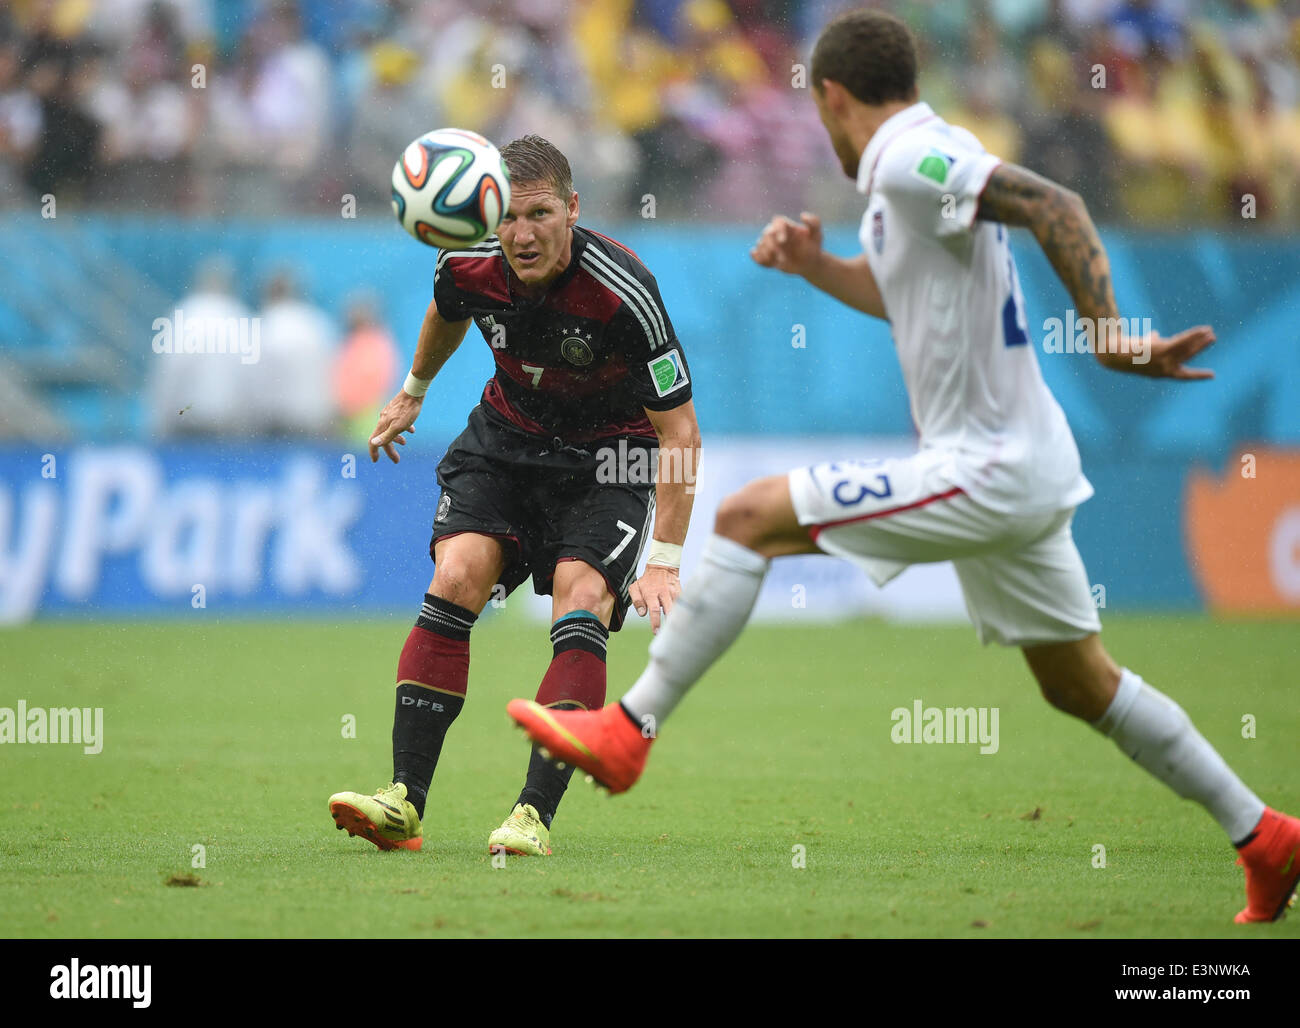 Recife, Brazil. 26th June, 2014. Germany's Bastian Schweinsteiger (L) and Fabian Johnson of the US vie for the ball during the FIFA World Cup group G preliminary round match between the USA and Germany at Arena Pernambuco in Recife, Brazil, 26 June 2014. Photo: Marcus Brandt/dpa/Alamy Live News Stock Photo